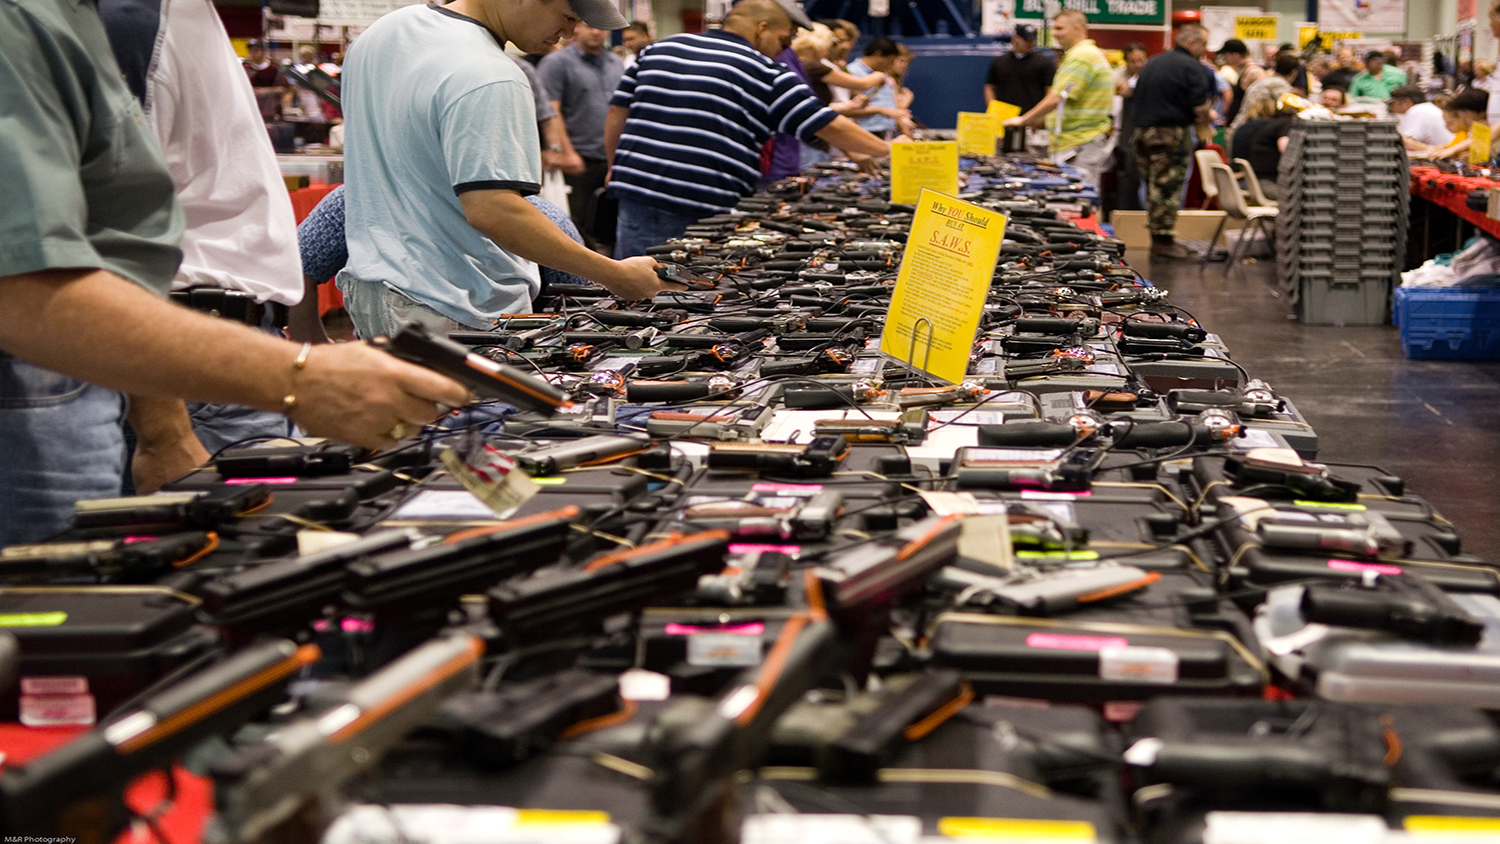 Buying and Selling a Firearm: Gun Shows